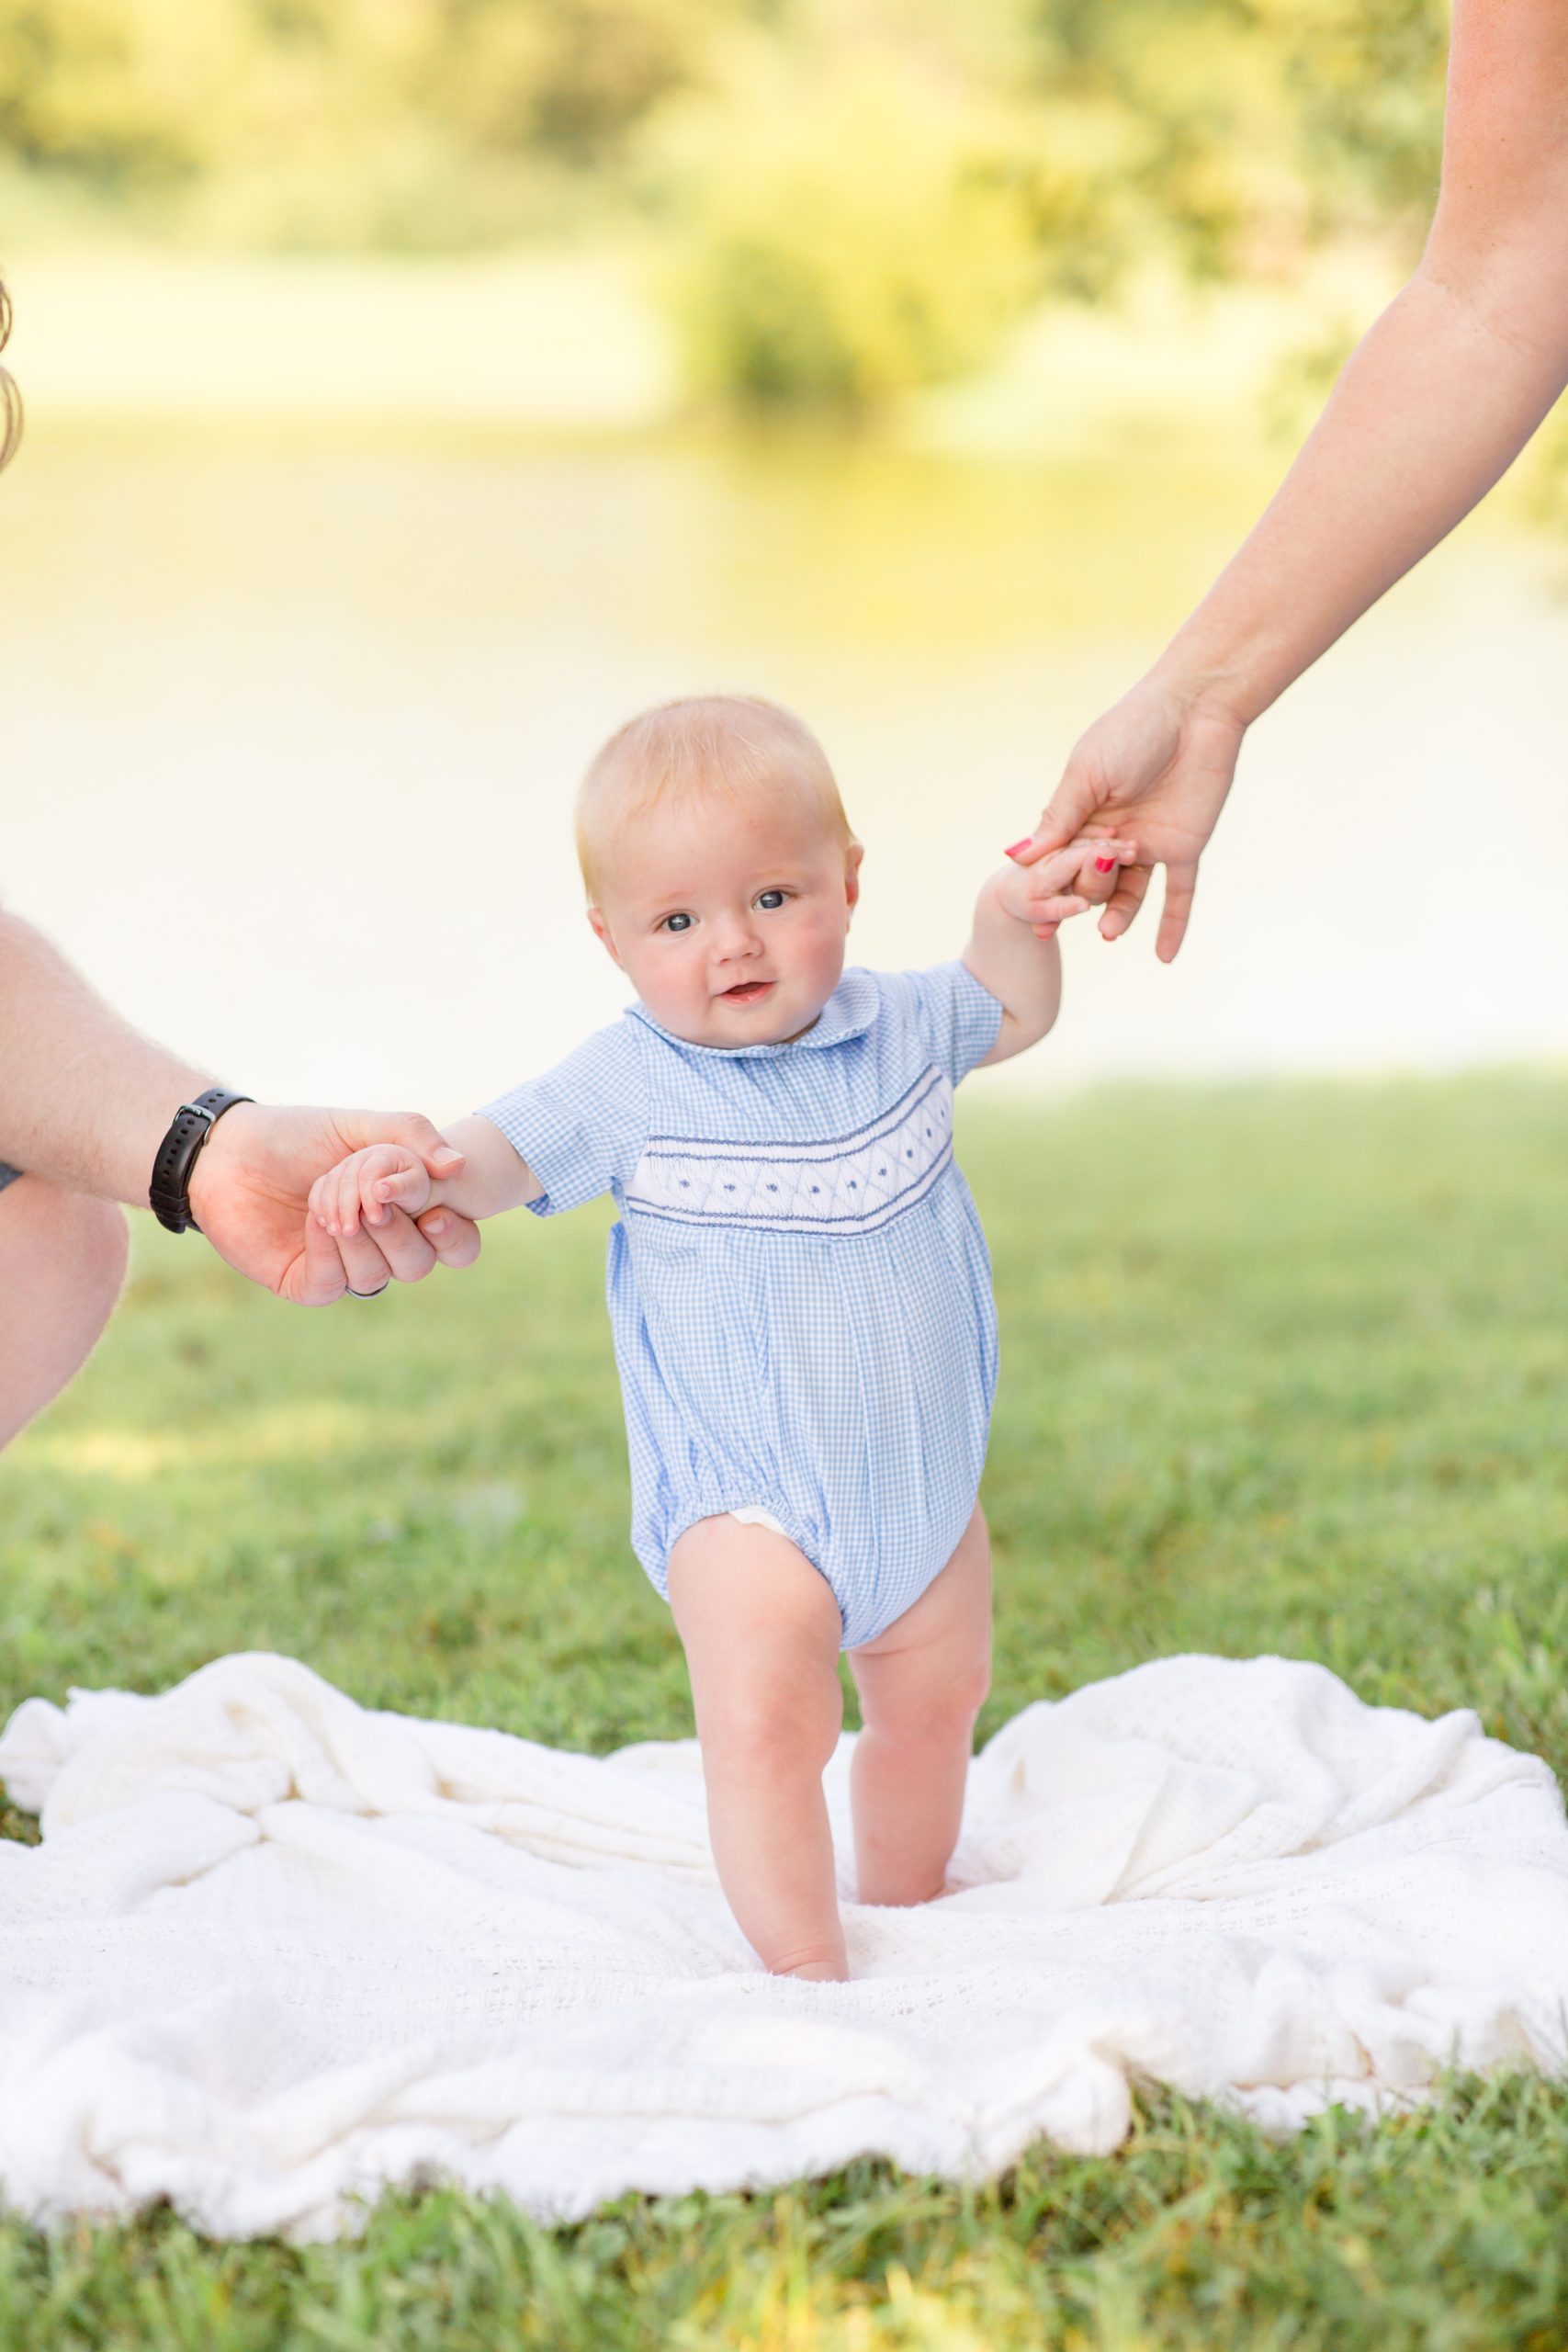 6 month milestone session with family photographer and educator Rebecca Rice of Rebecca Rice Photography. Click to see more from this sweet session live on the blog now!